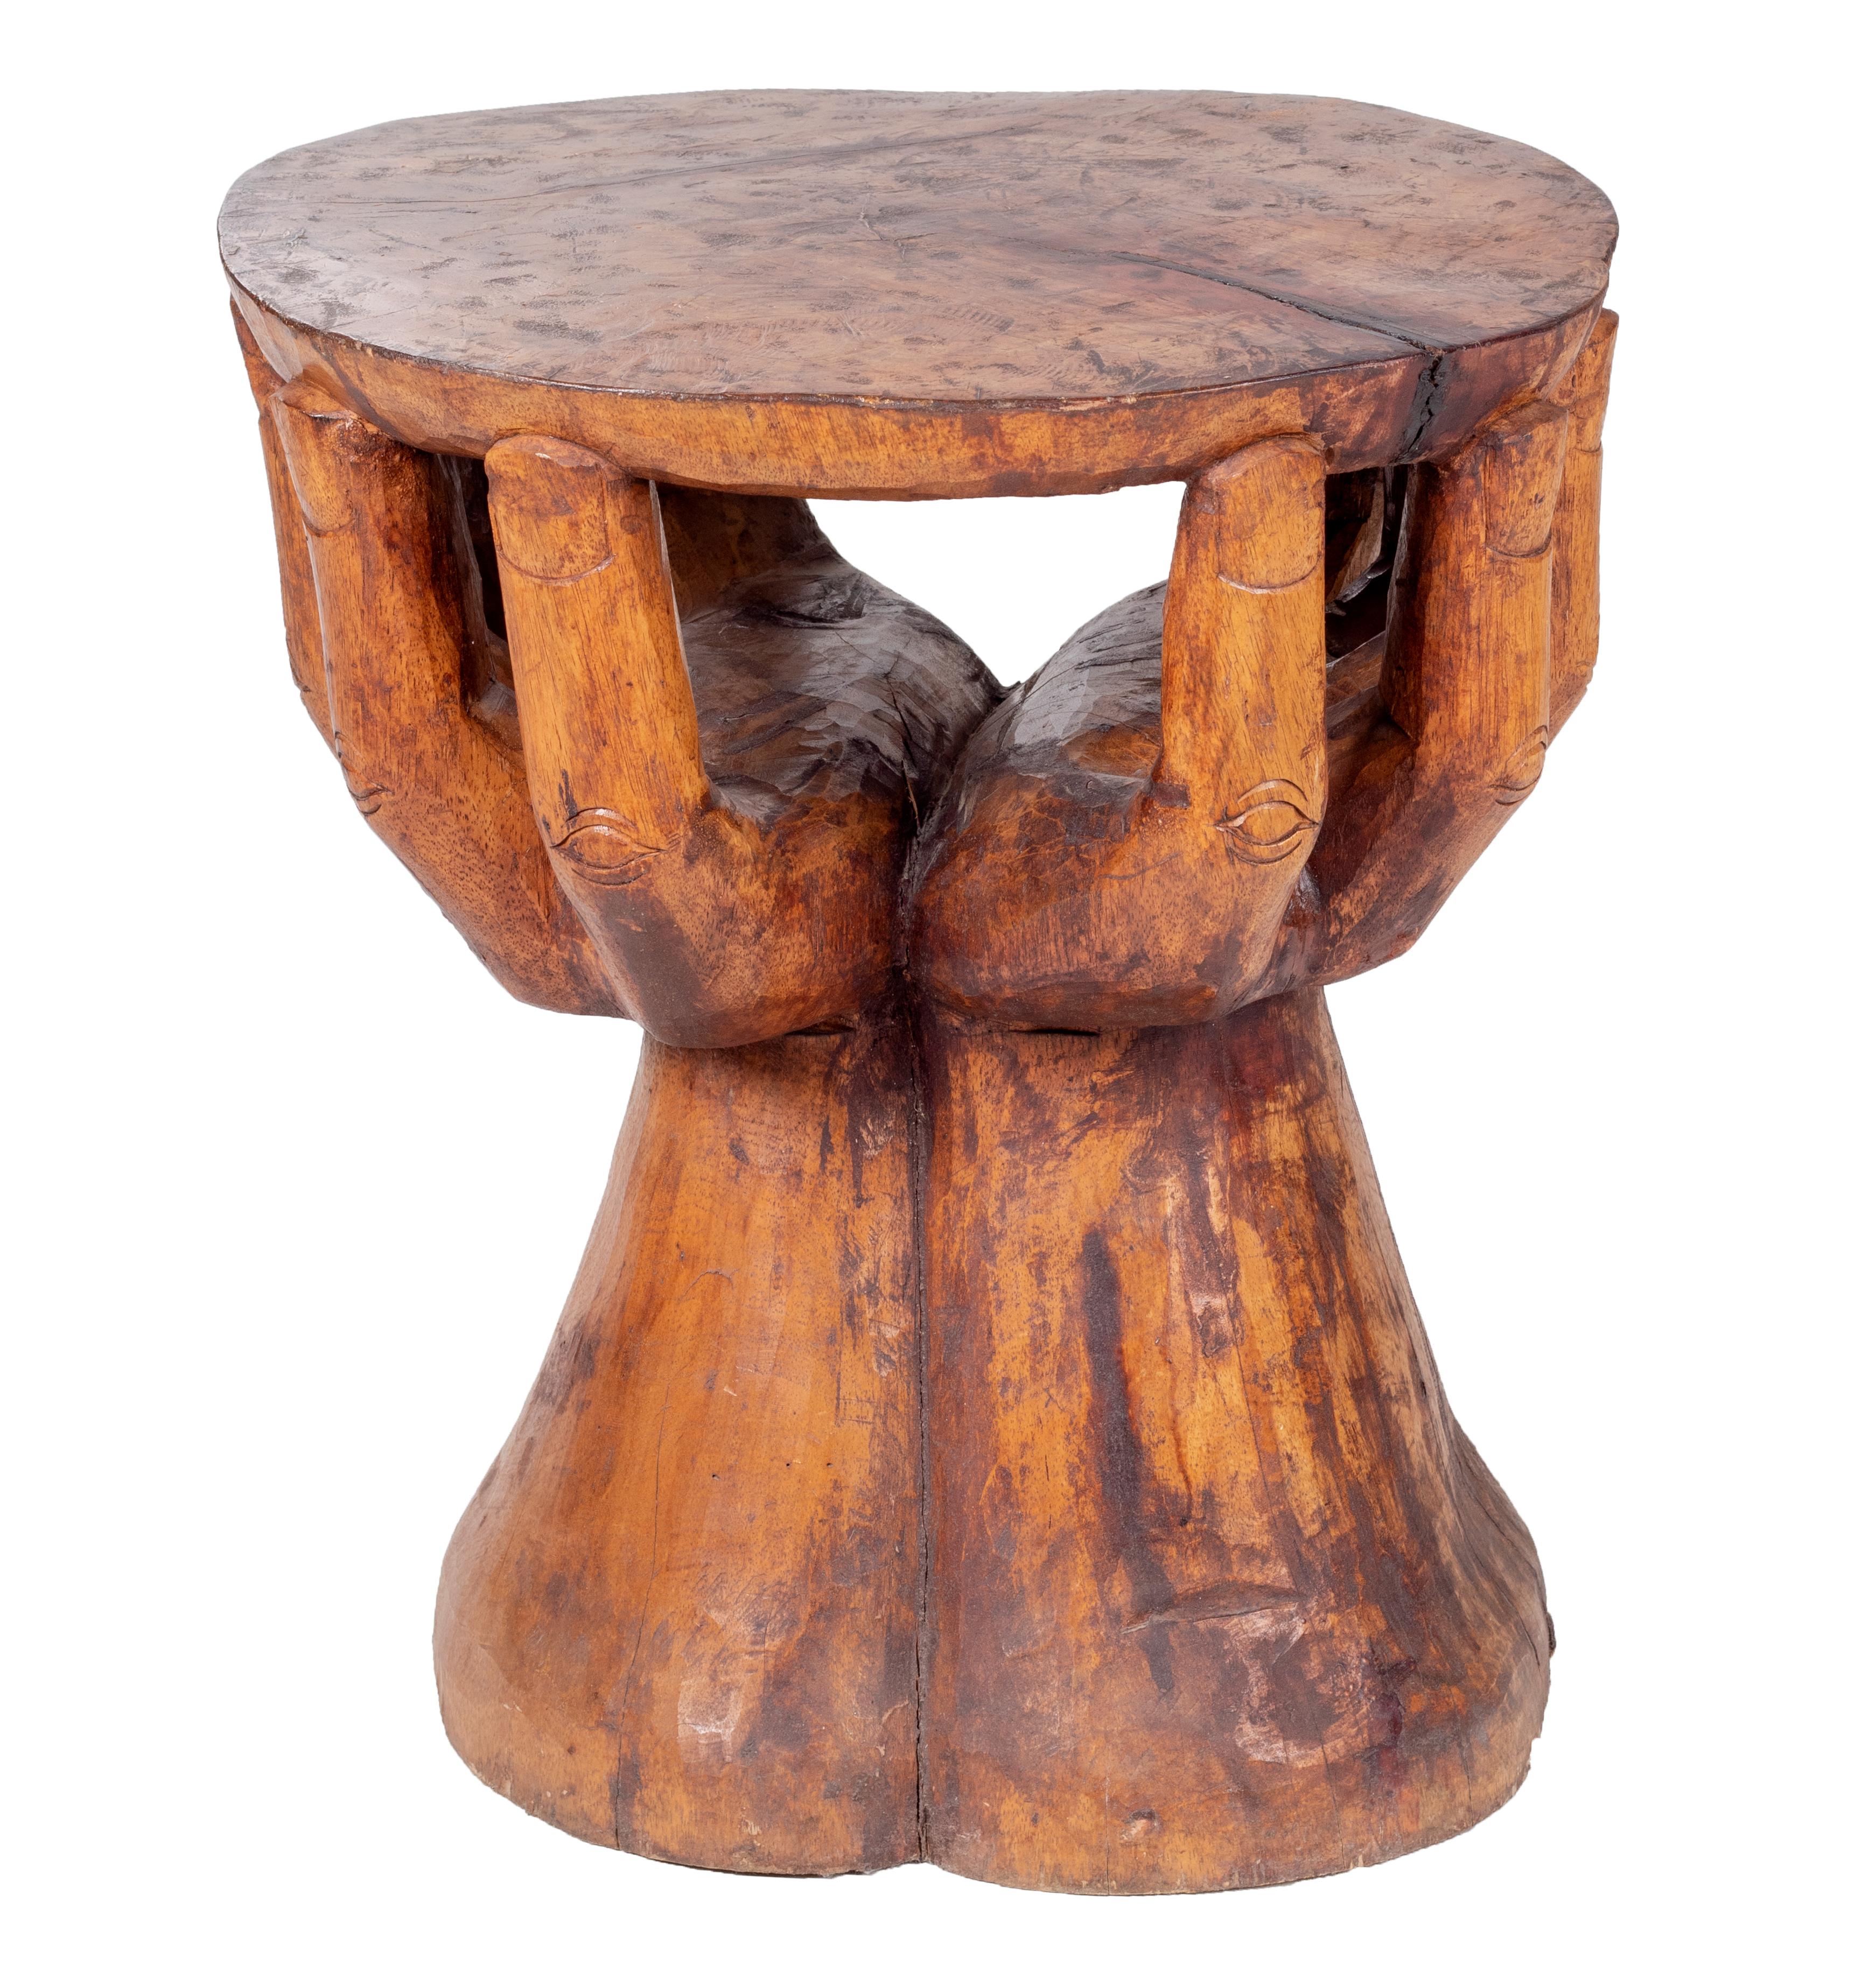 Hand shaped fruit wood set of table and four chairs. 

Measures of the table: 56 x 49 x 45 cm

Measures of the hands: 75 x 37 x 37 cm.